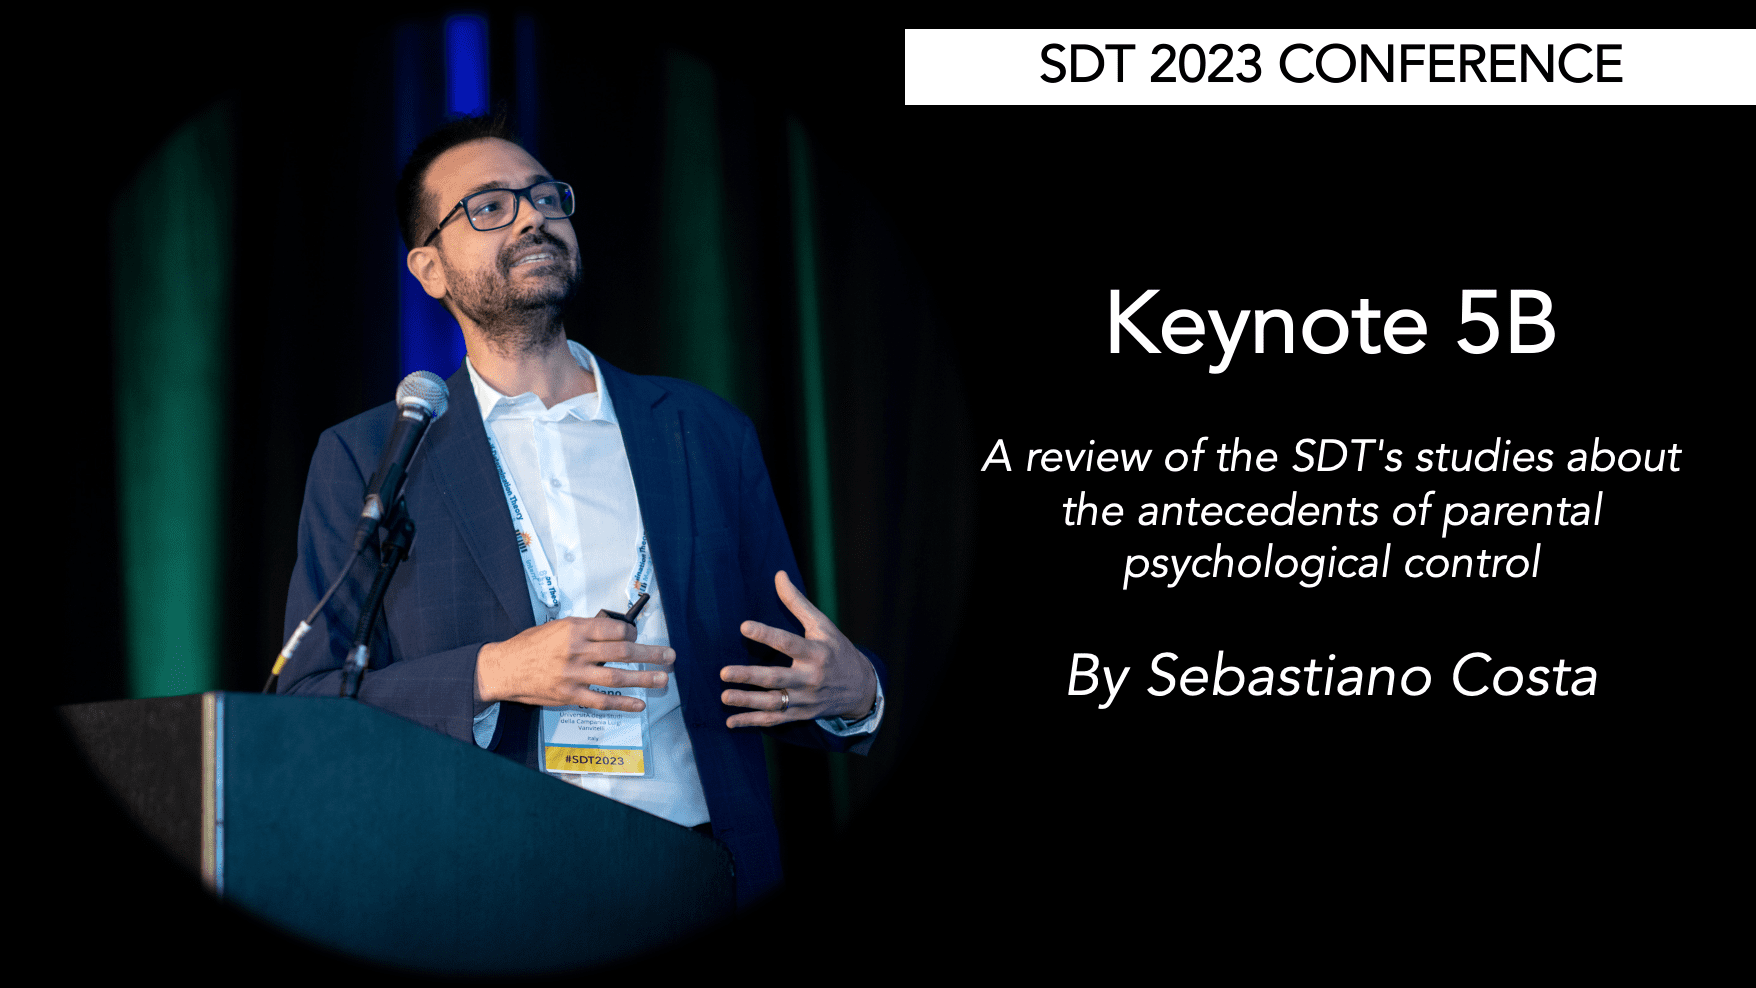 A review of the SDTs studies about the antecedents of parental psychological control  Sebastiano Costa keynote  SDT2023